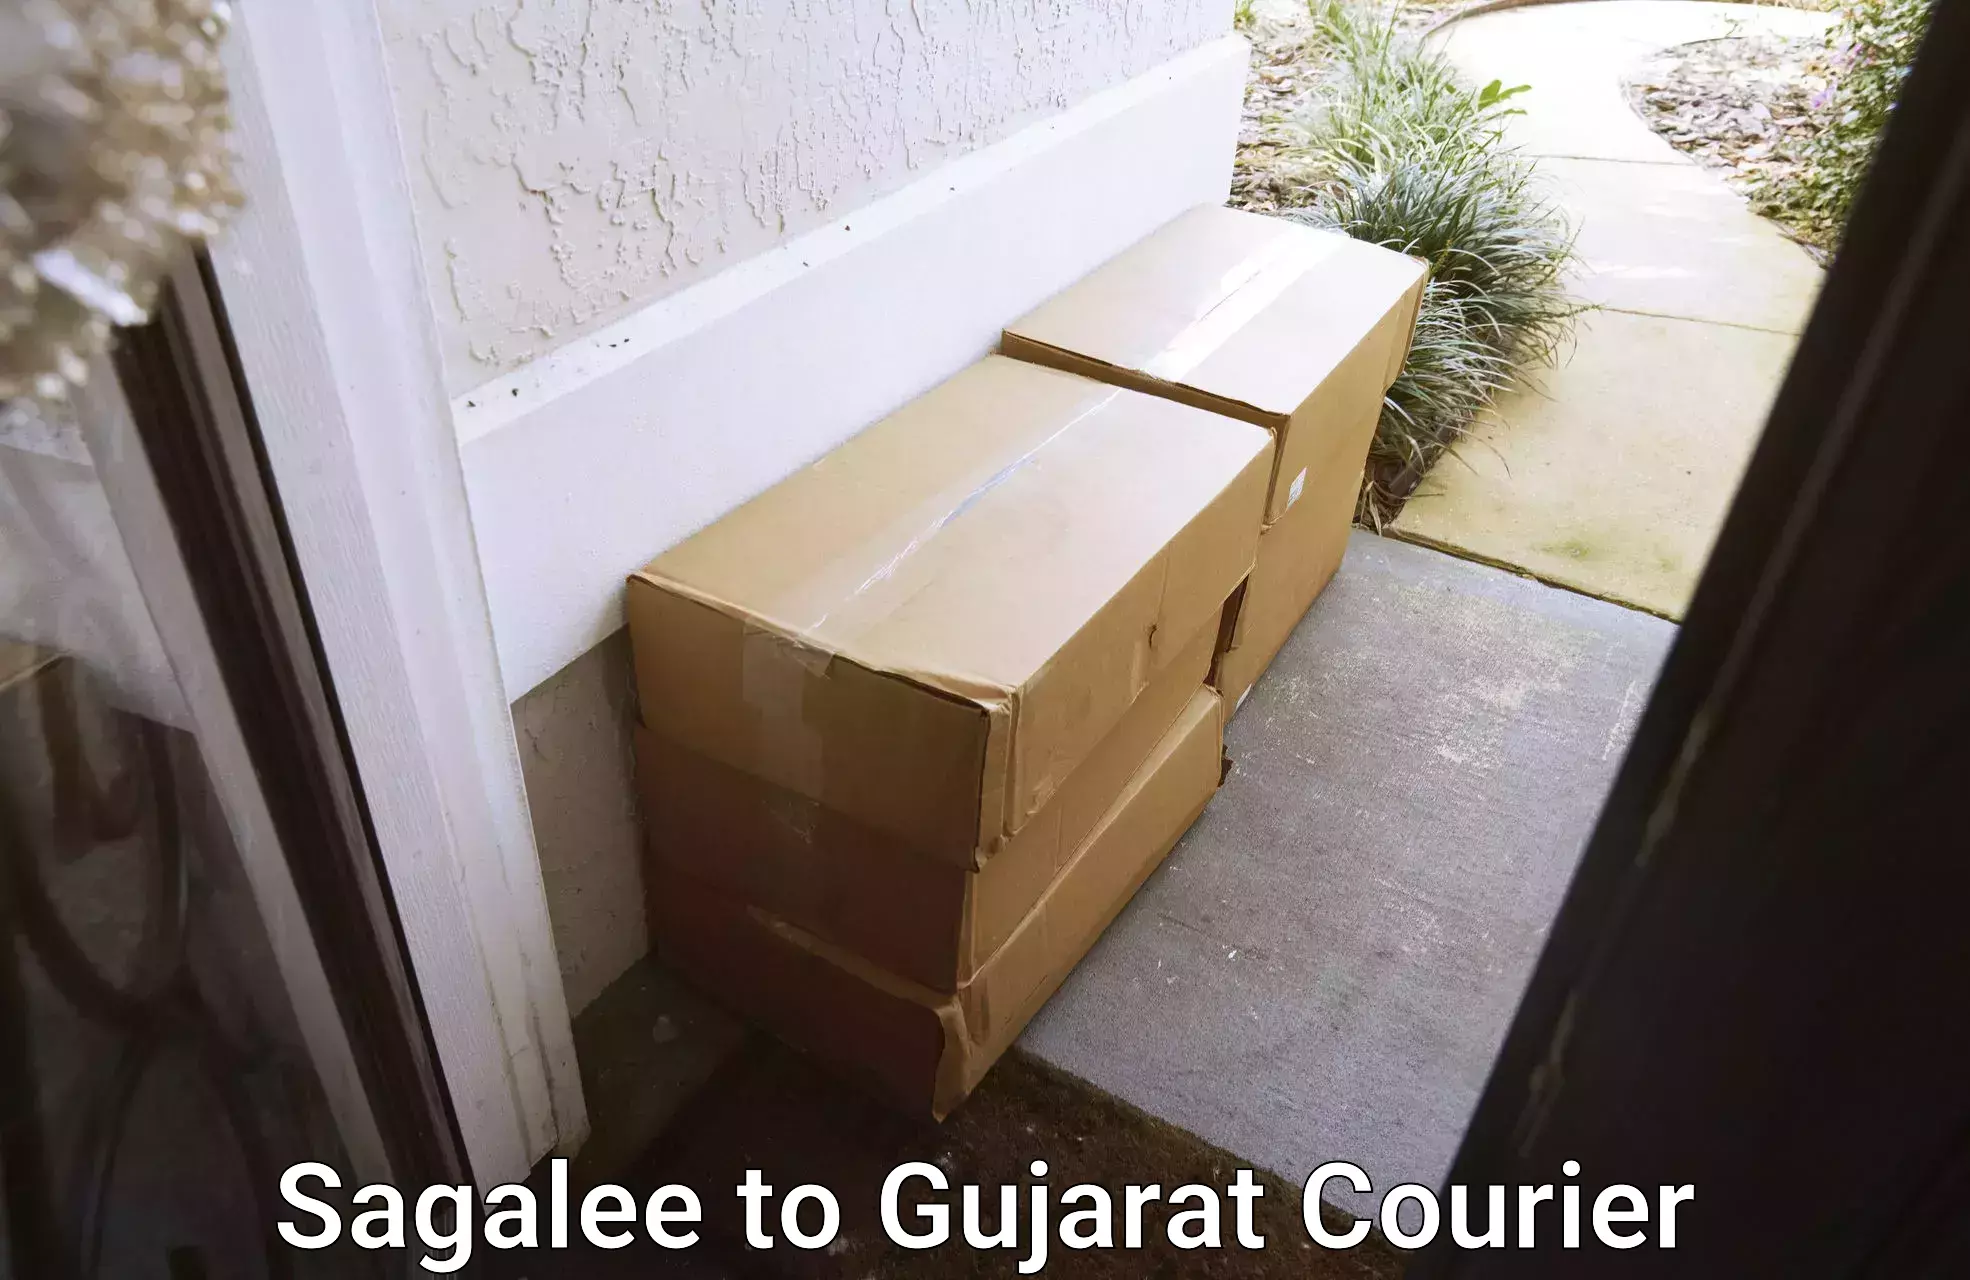 Personal courier services Sagalee to Godhra